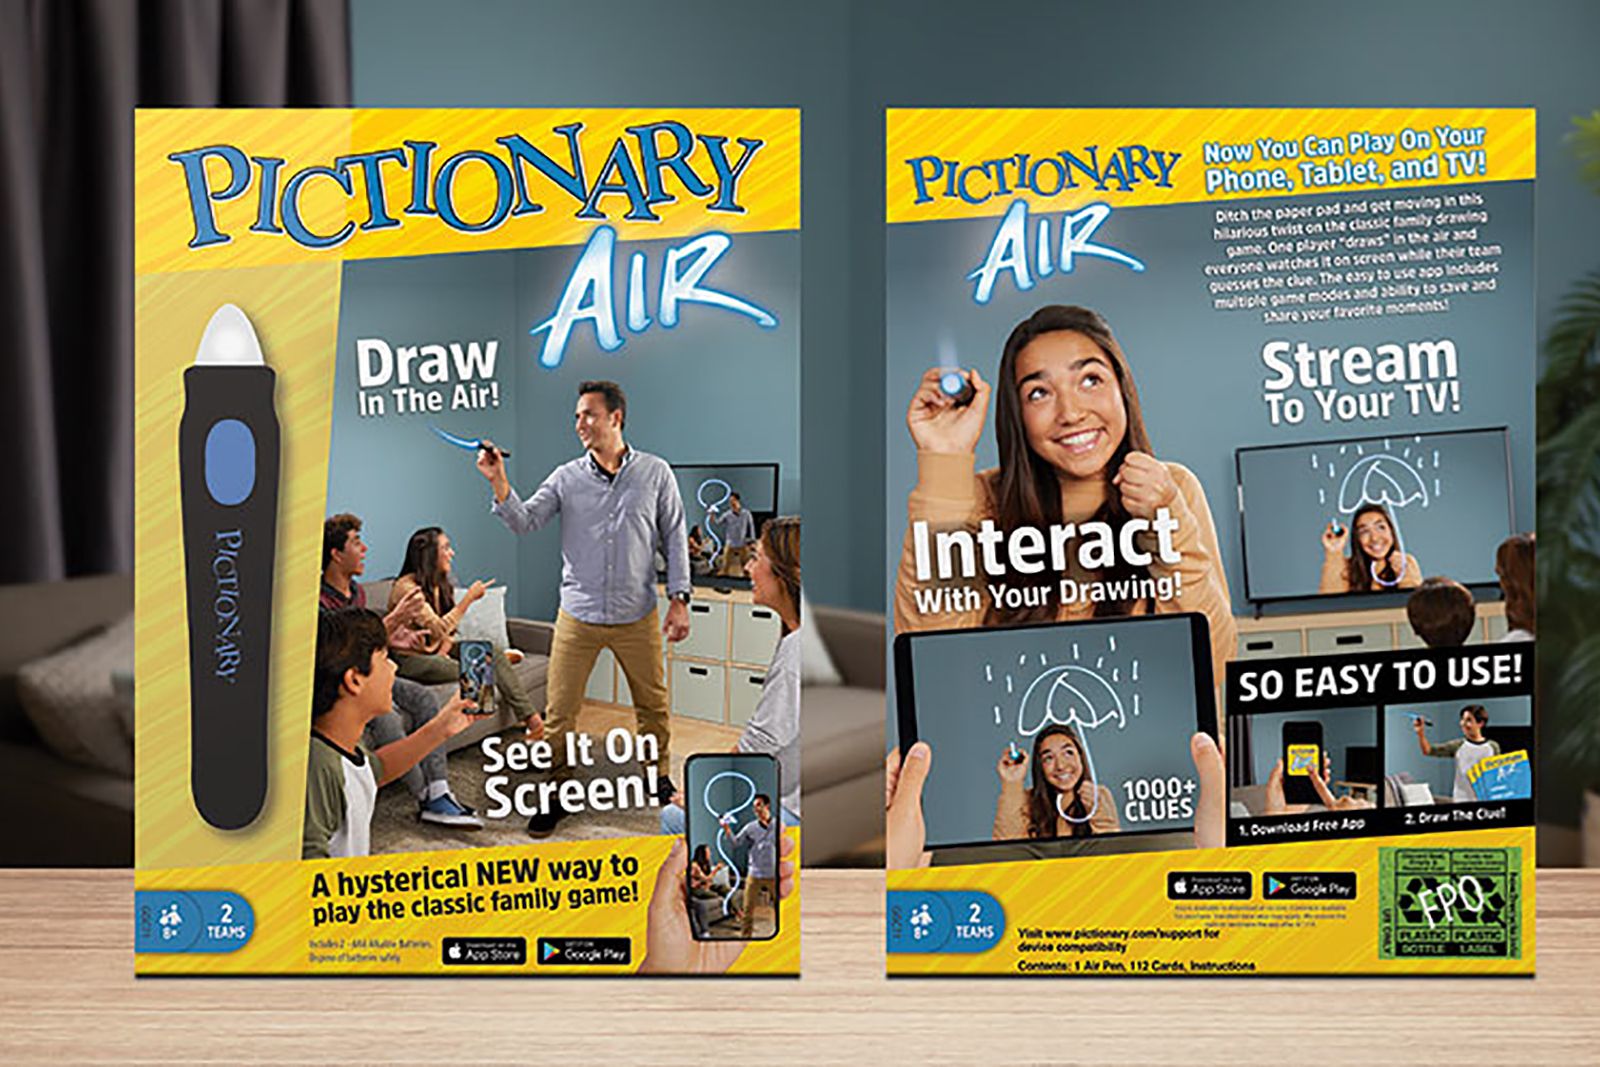 Pictionary Air adds a high-tech twist to the classic drawing game image 1